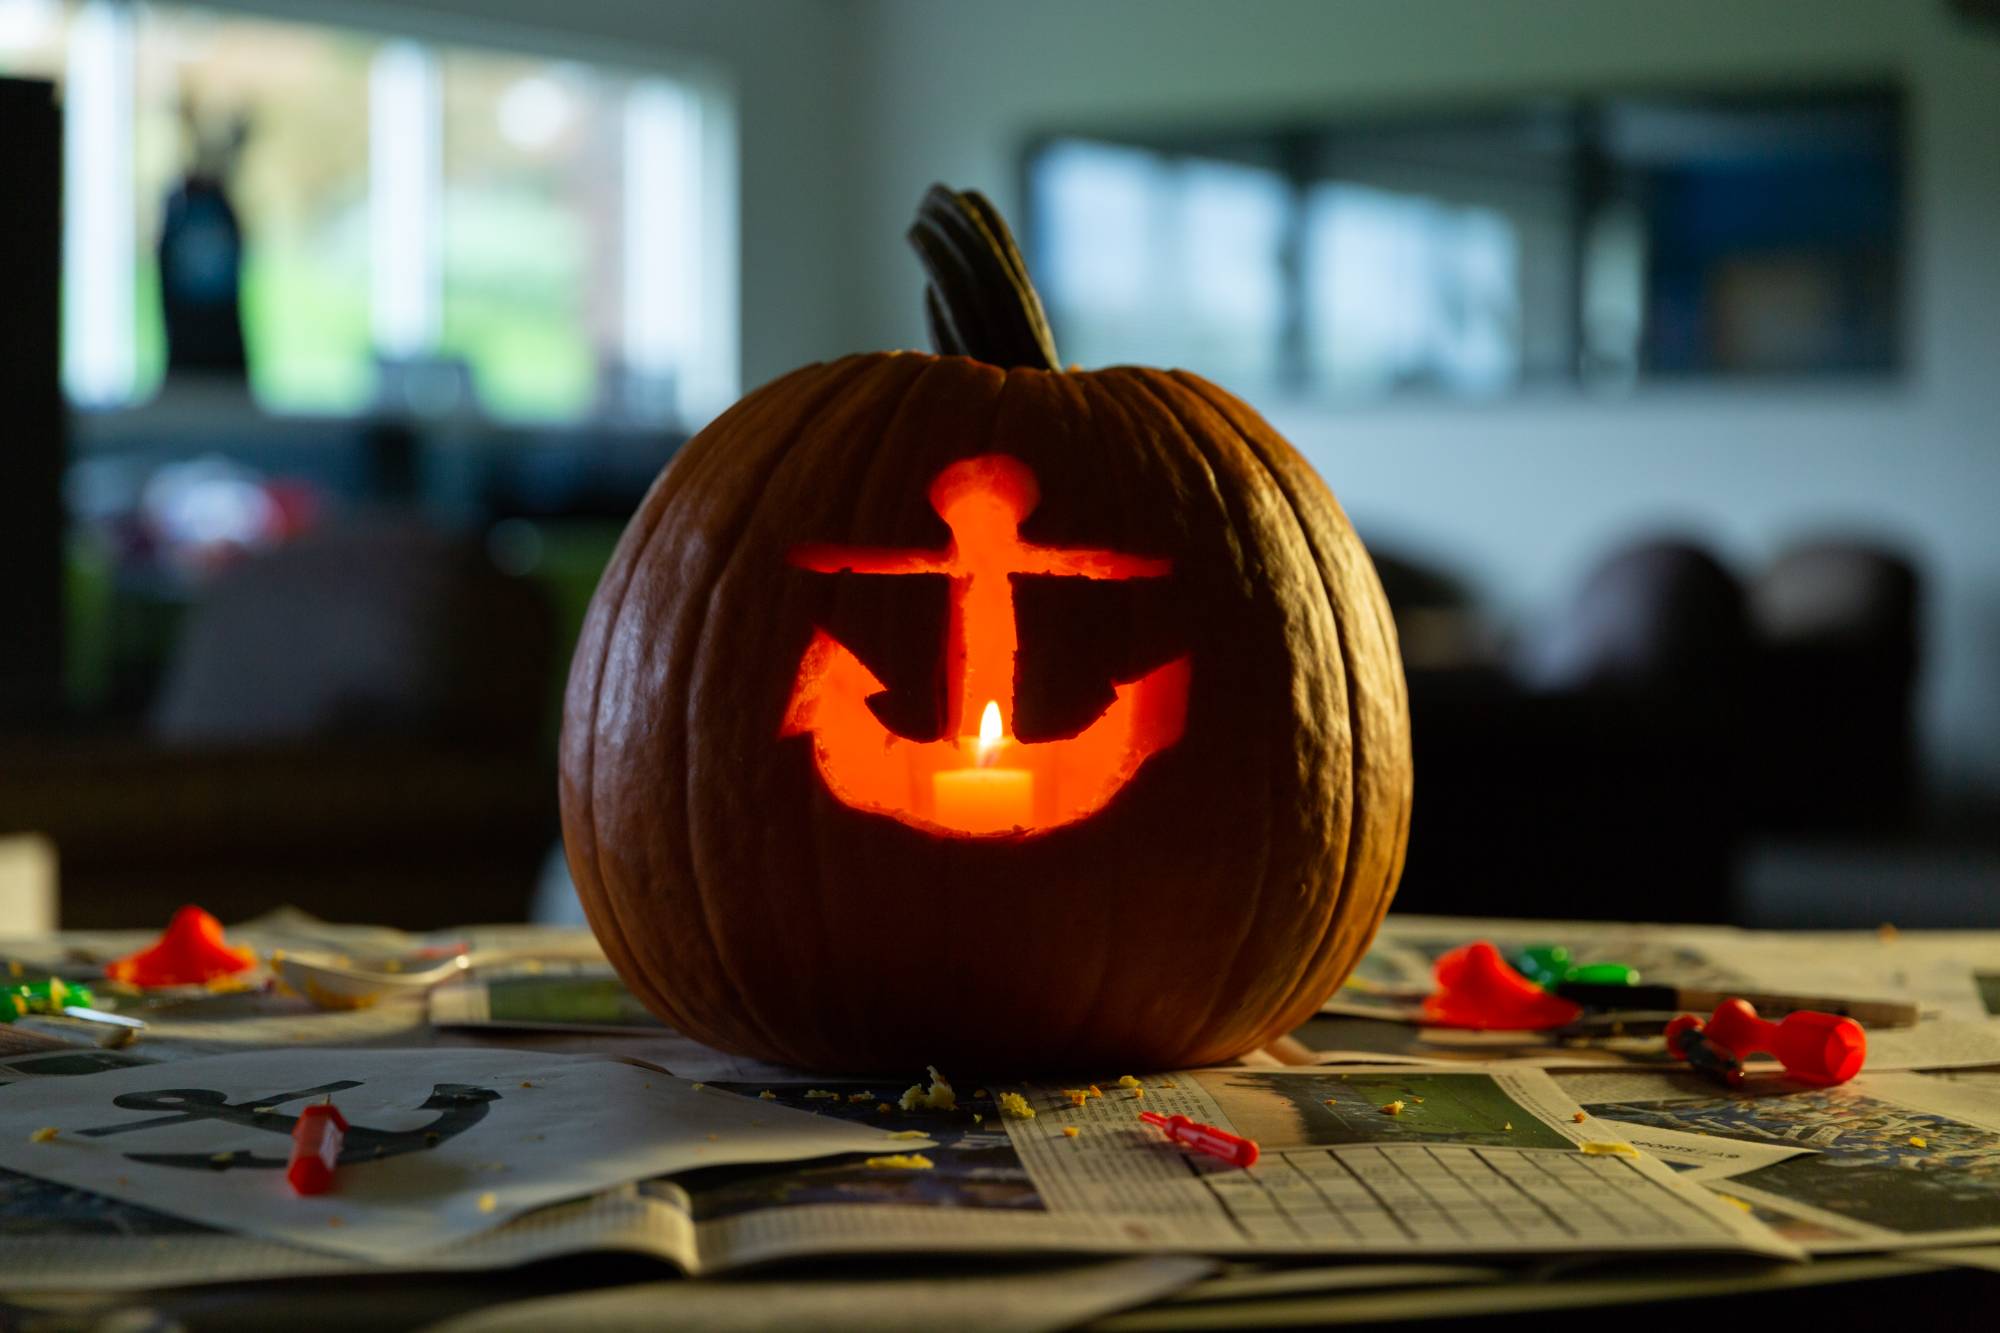 Pumpkin with anchor carved into it